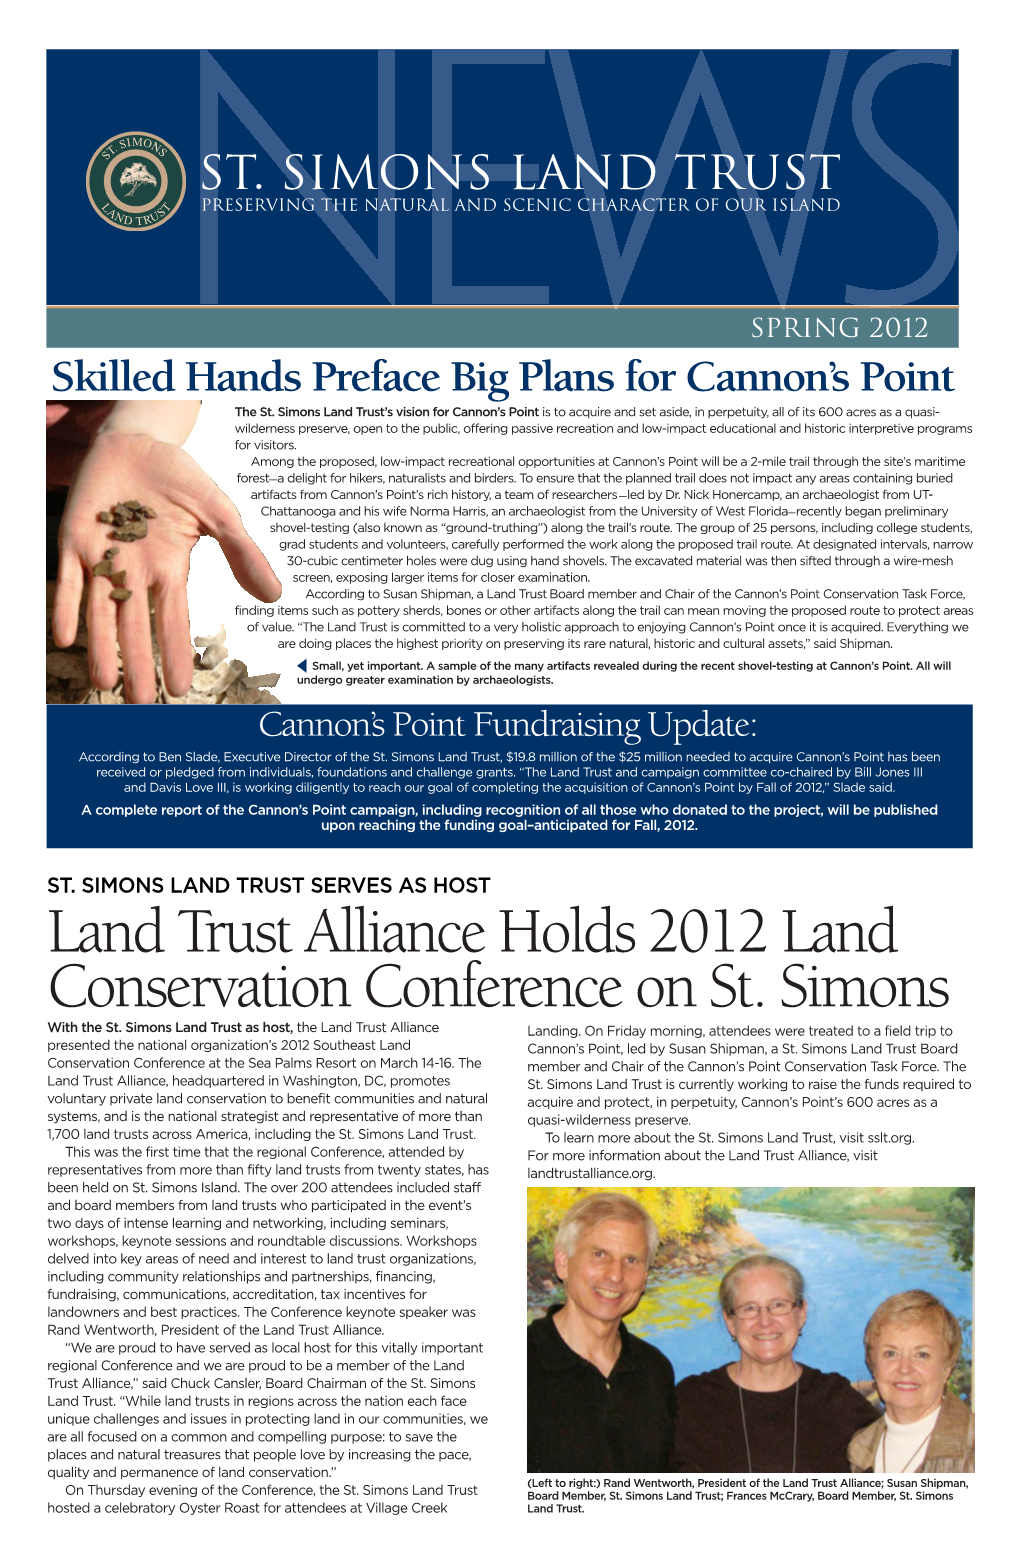 Spring 2012 Skilled Hands Preface Big Plans for Cannon’S Point the St